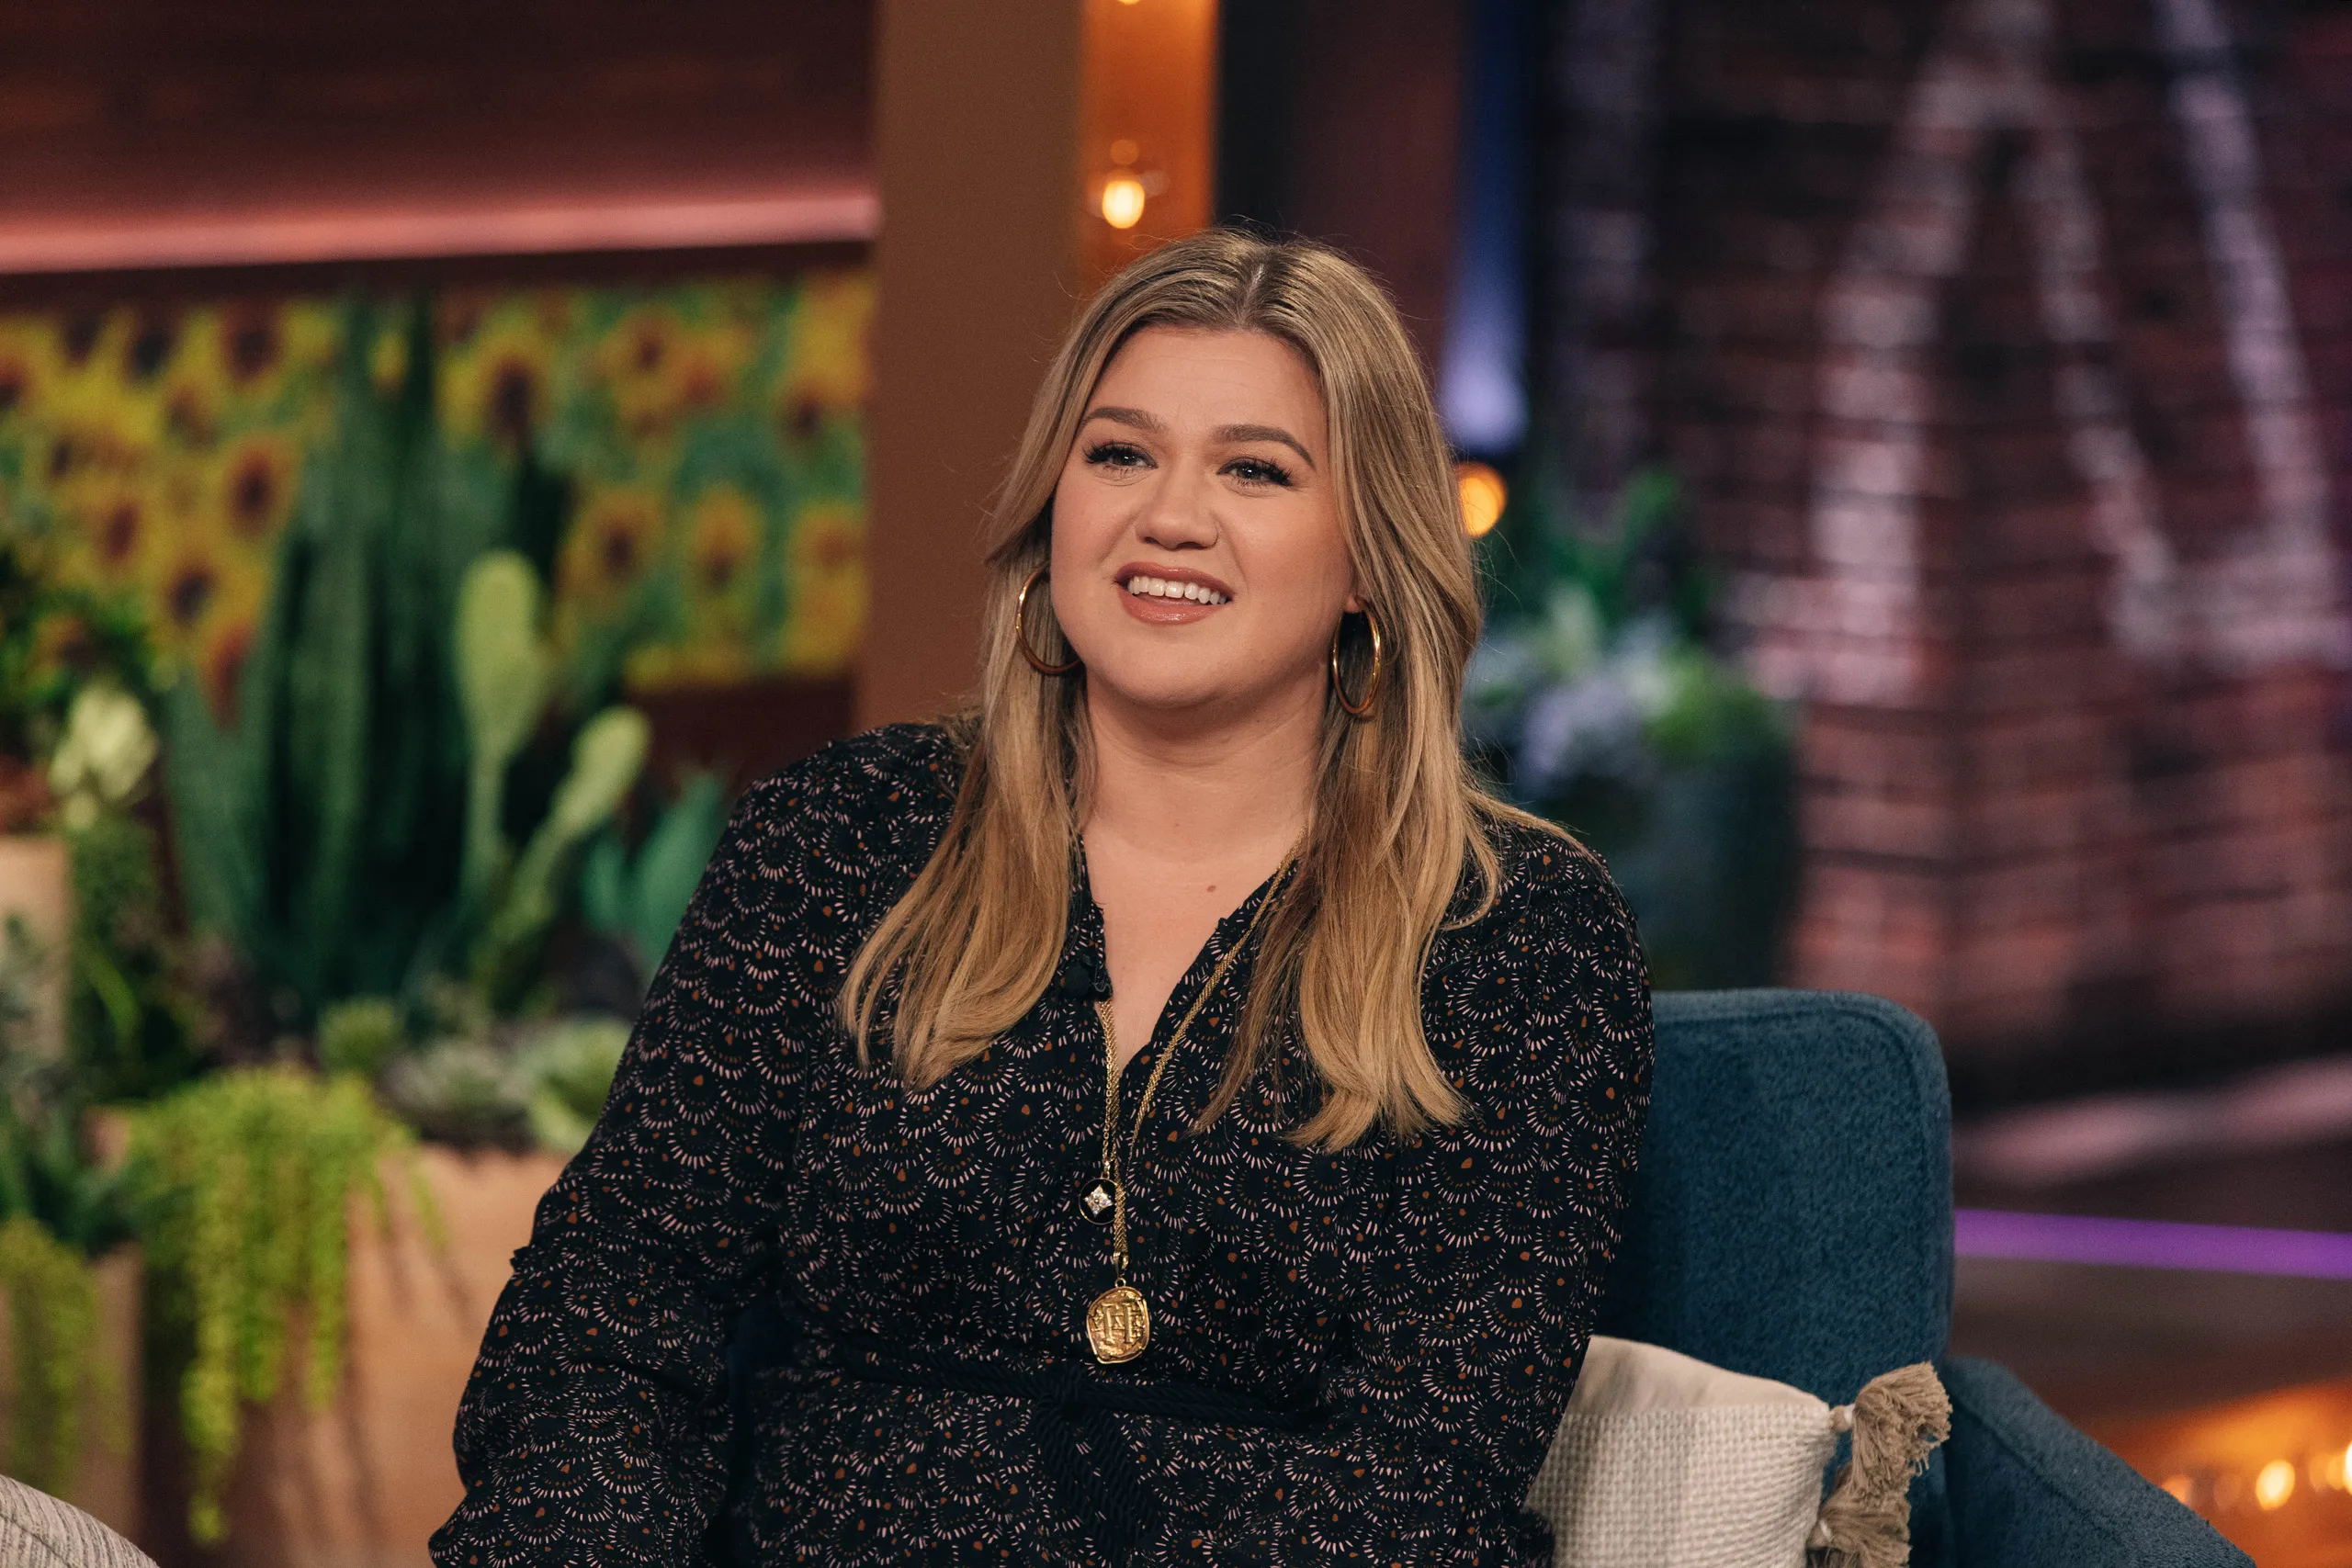 Kelly Clarkson is a well-known singer and TV host